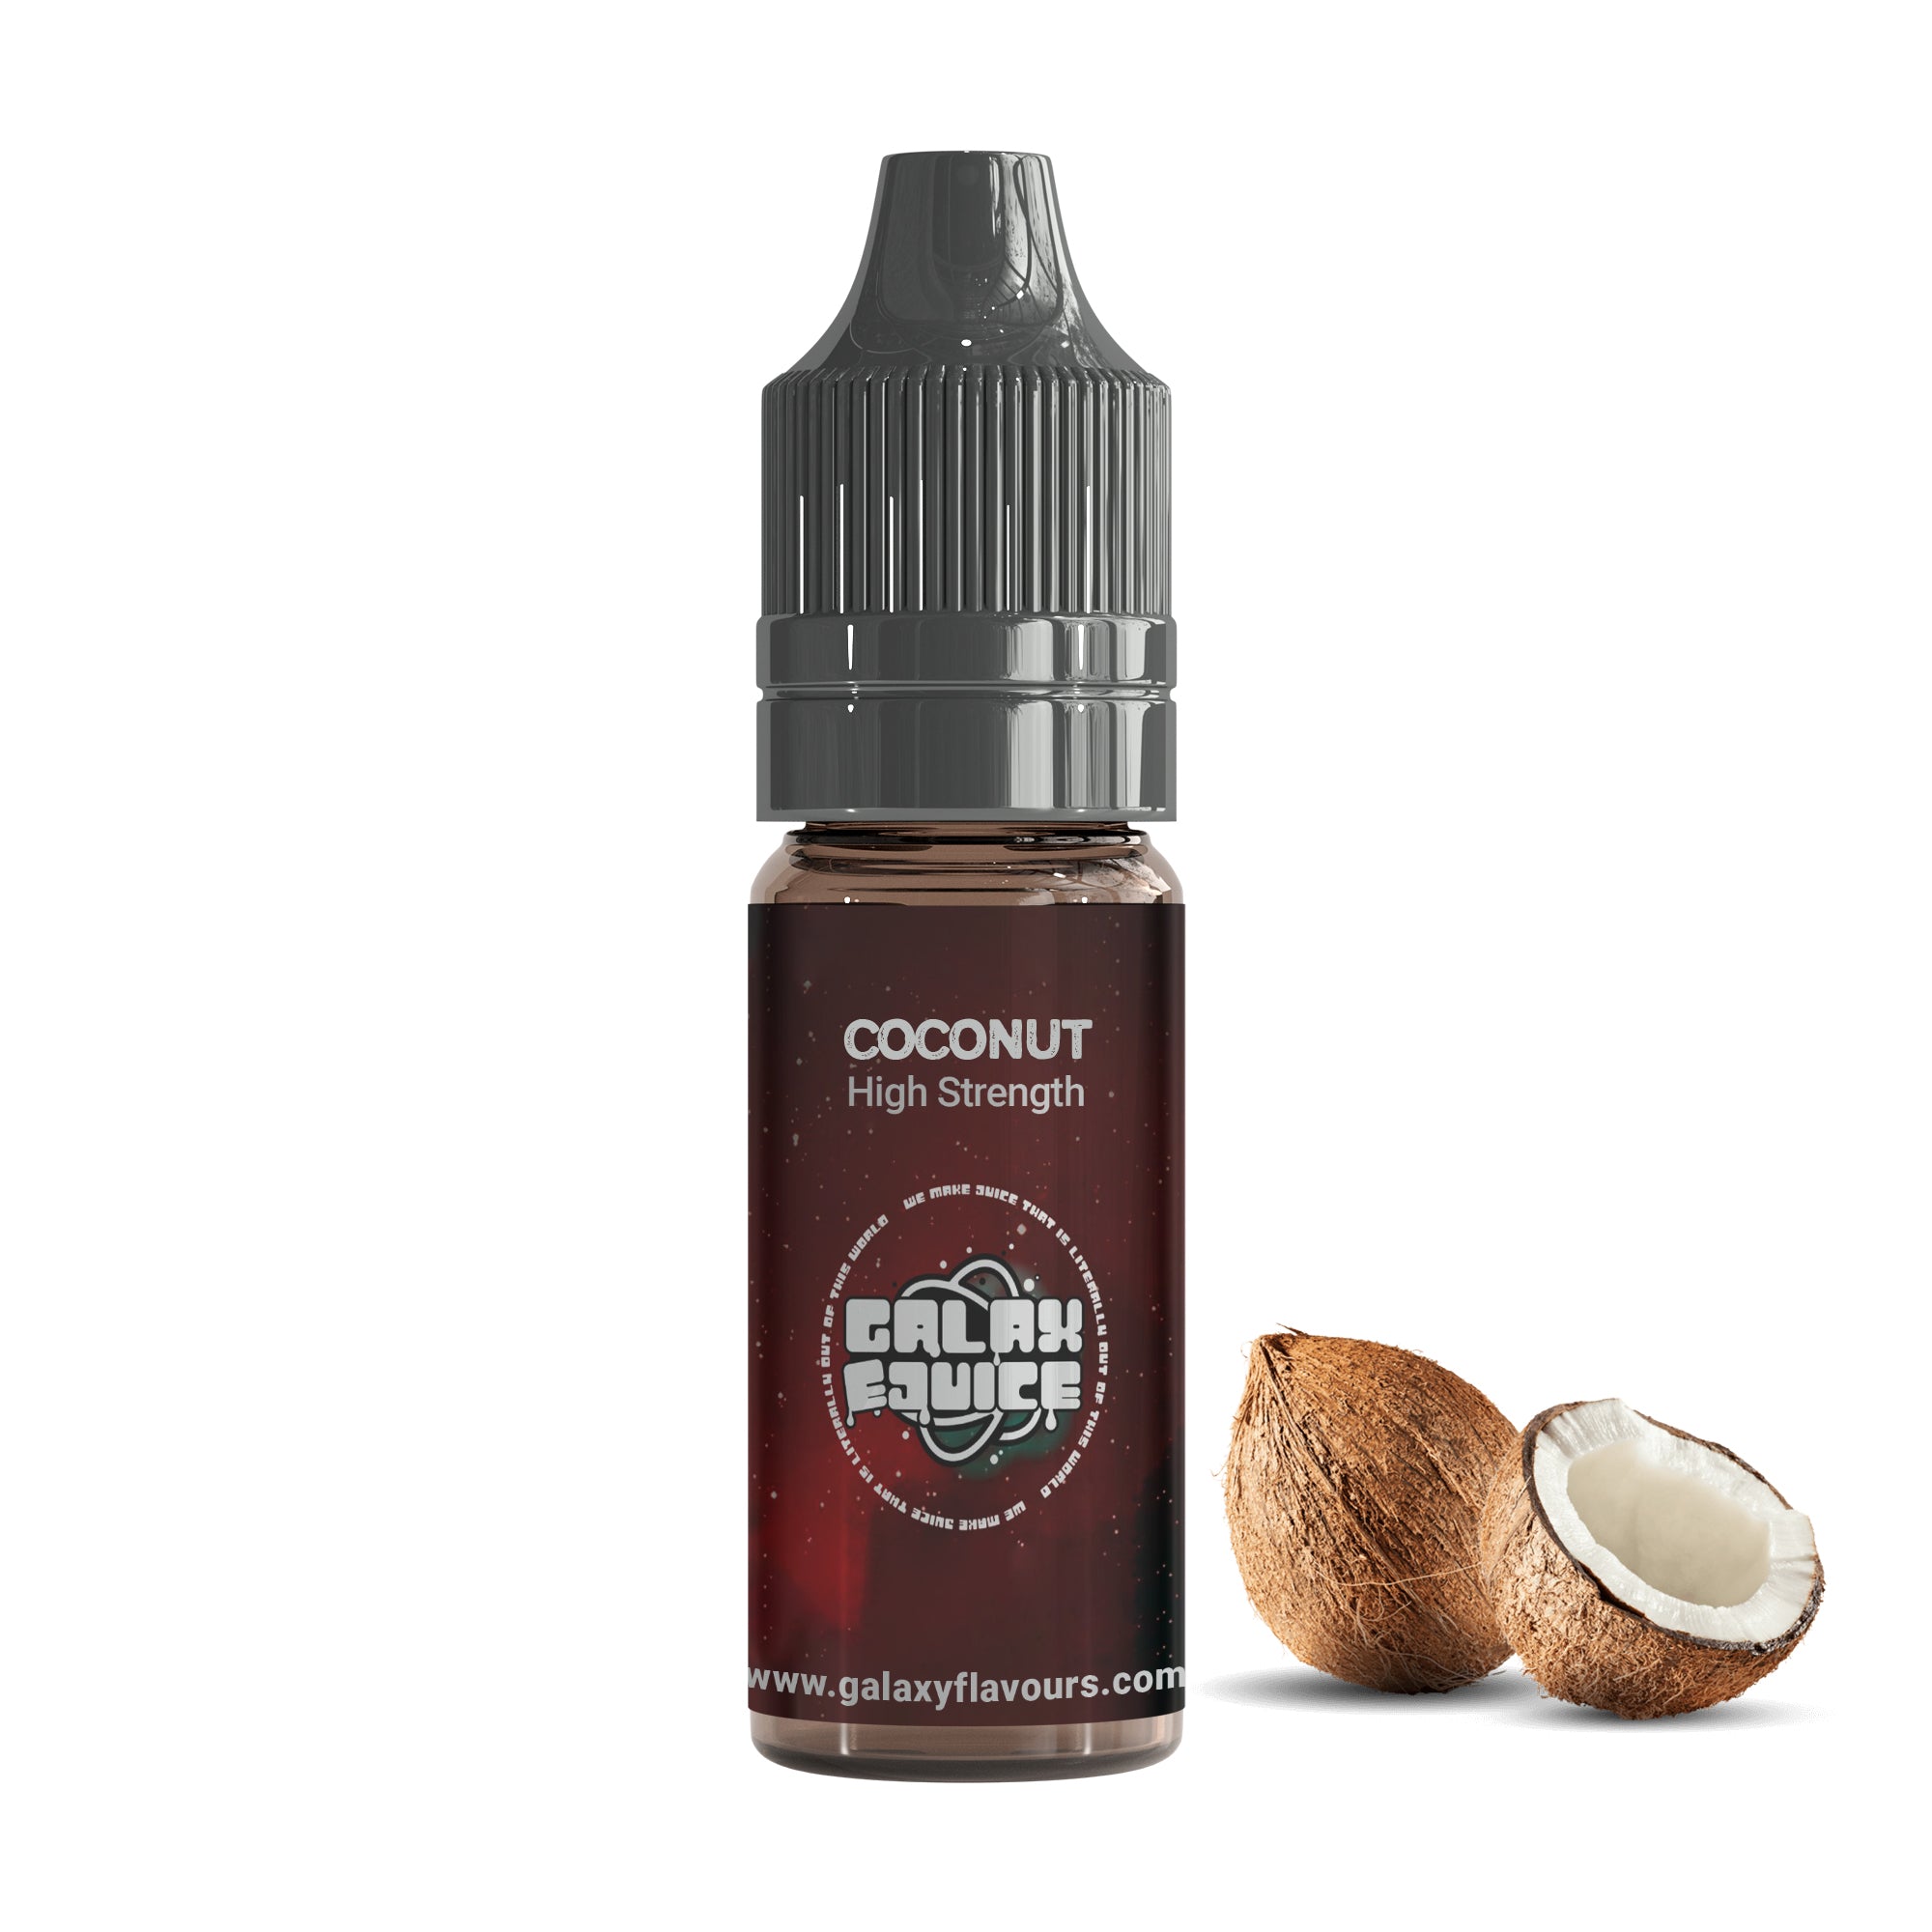 Coconut High Strength Professional Flavouring.